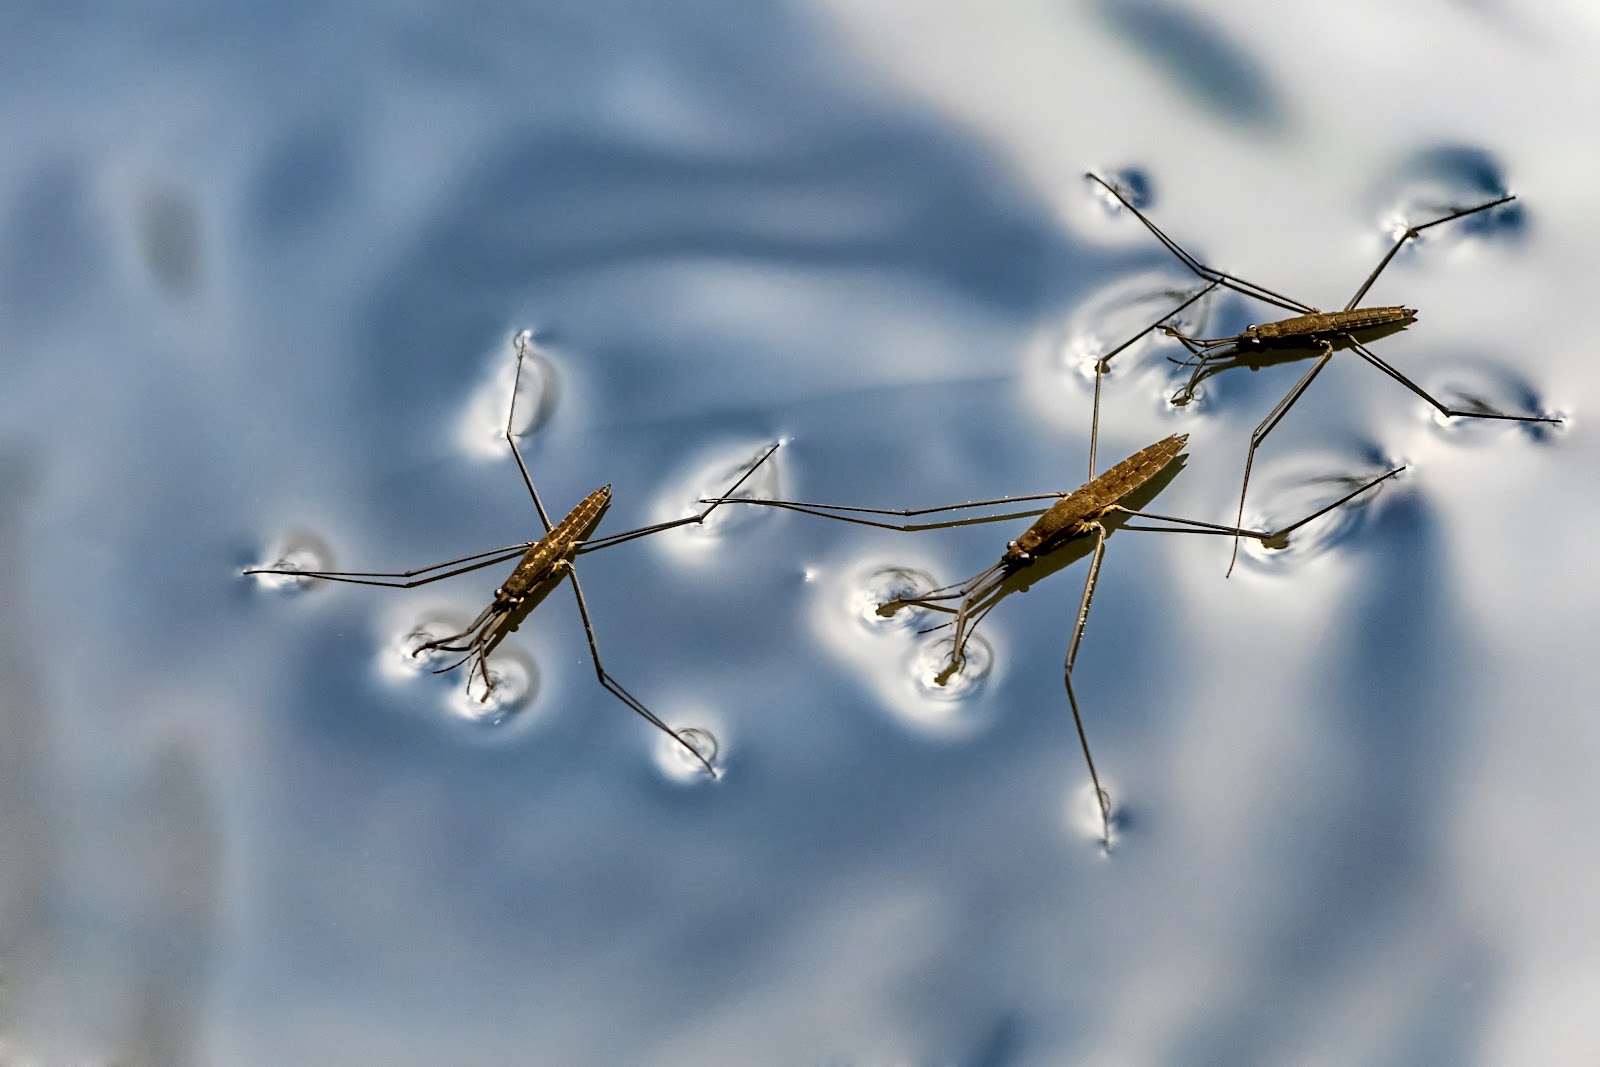 three strider bugs striding across the surface of water 